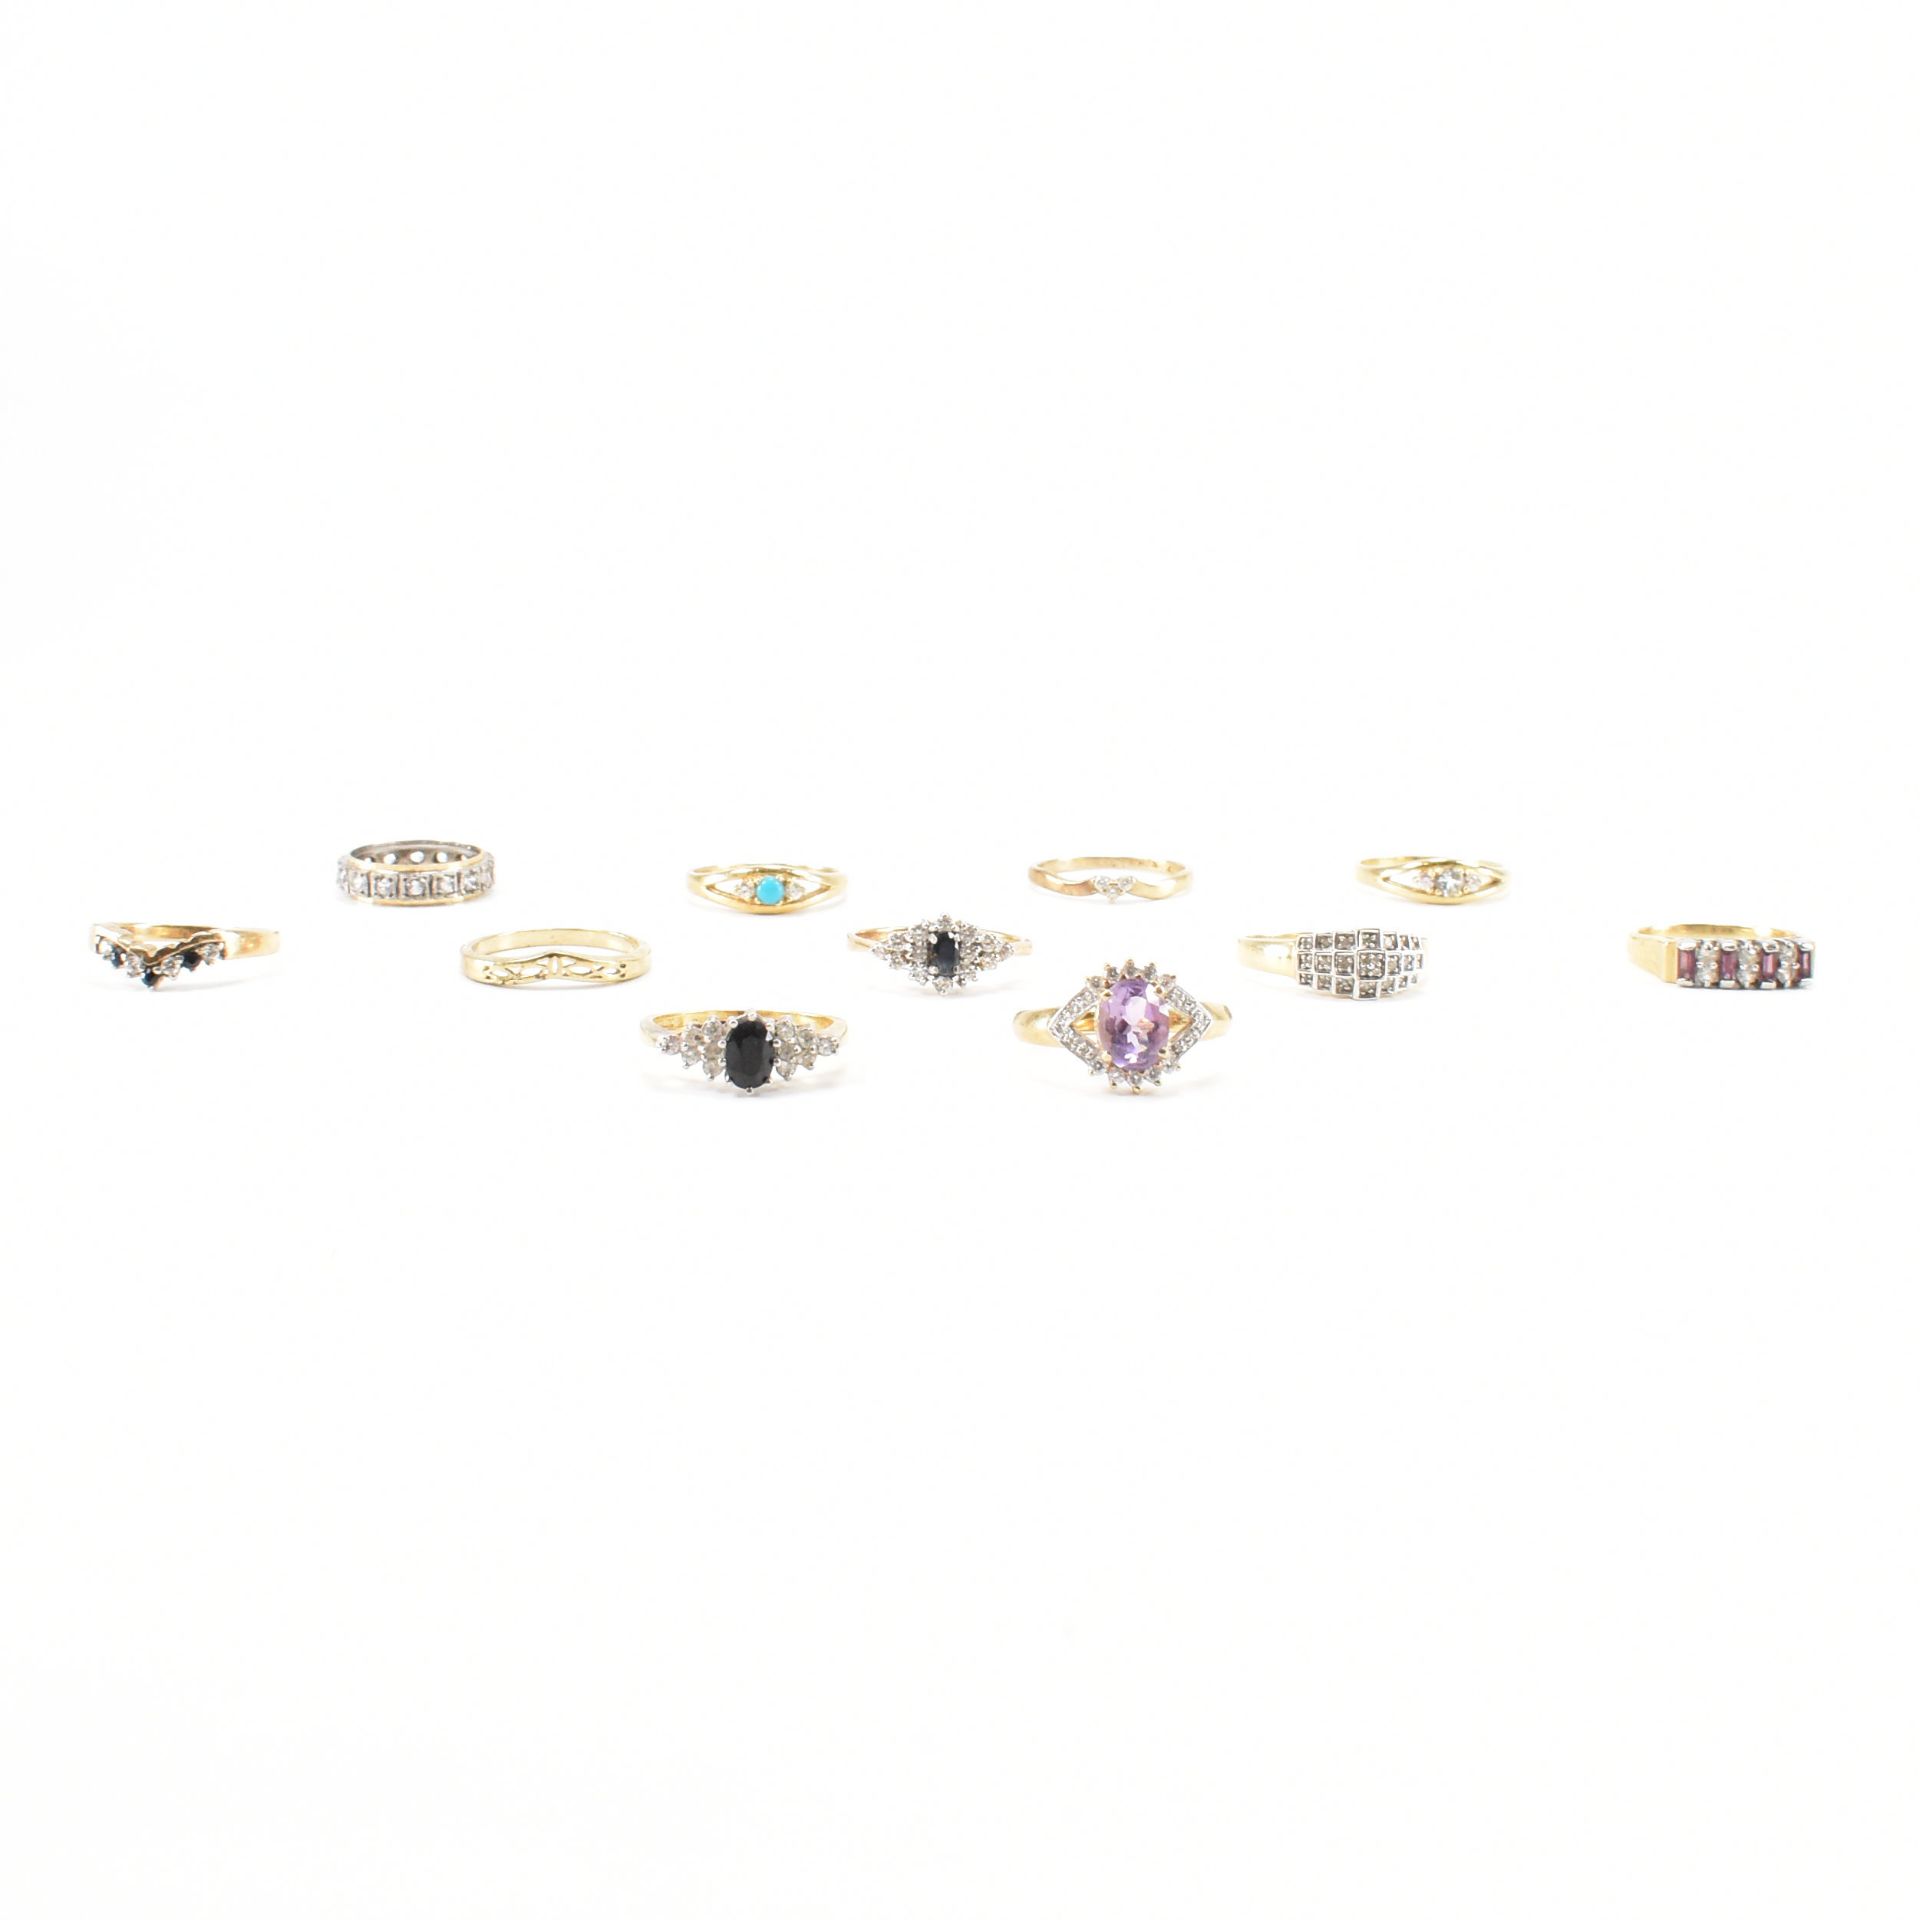 COLLECTION OF GOLD ON SILVER GEM SET RINGS